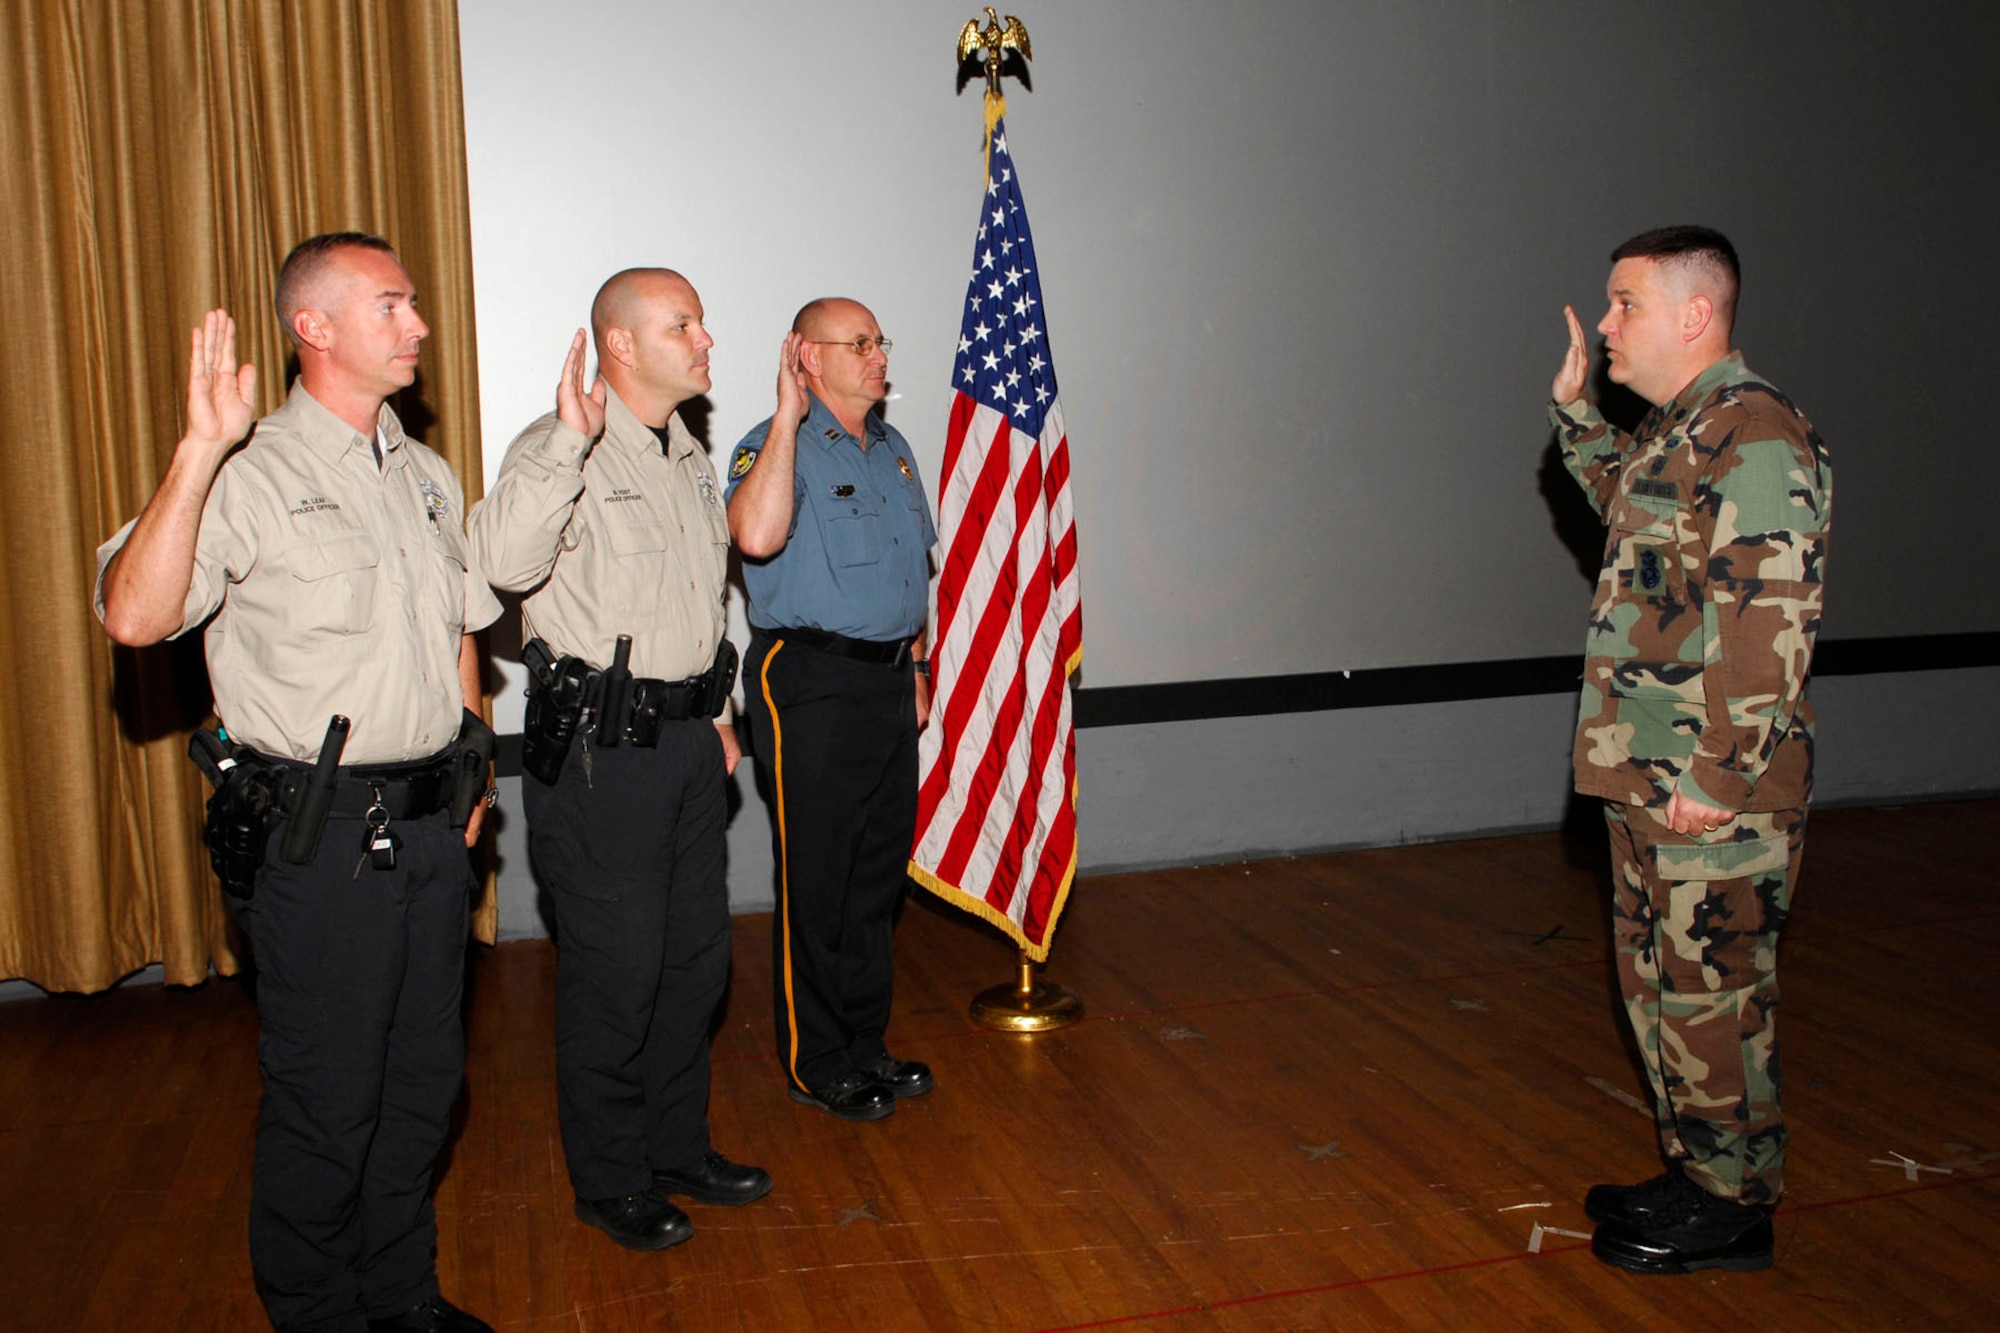 Lt. Col. Timothy Meserve, 96th Security Forces commander, administers the oath to Officers Jamie Leaf and Brad Yost, and Capt. Joel Byrd.  Officers Leaf and Yost recently graduated from Federal Law Enforcement Training Center.